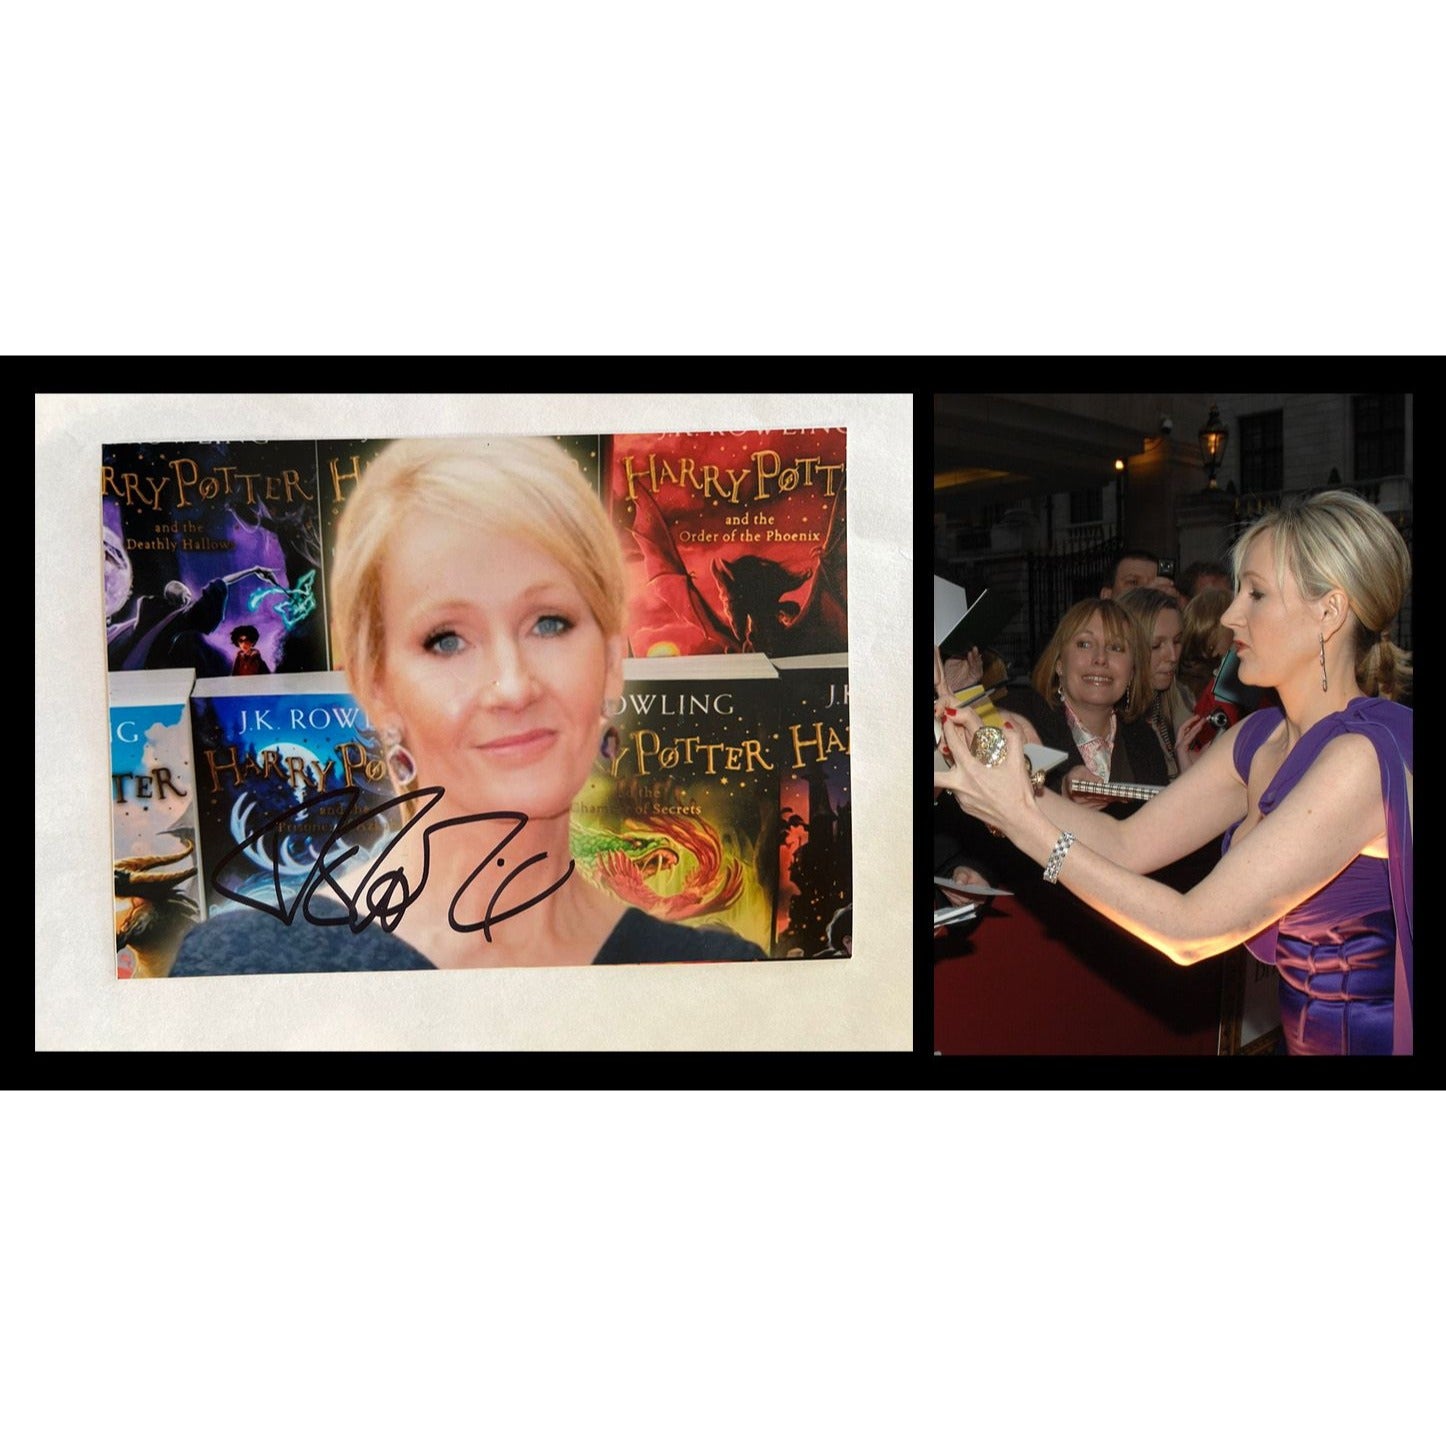 JK Rowling Harry Potter author 5x7 photo signed with proof